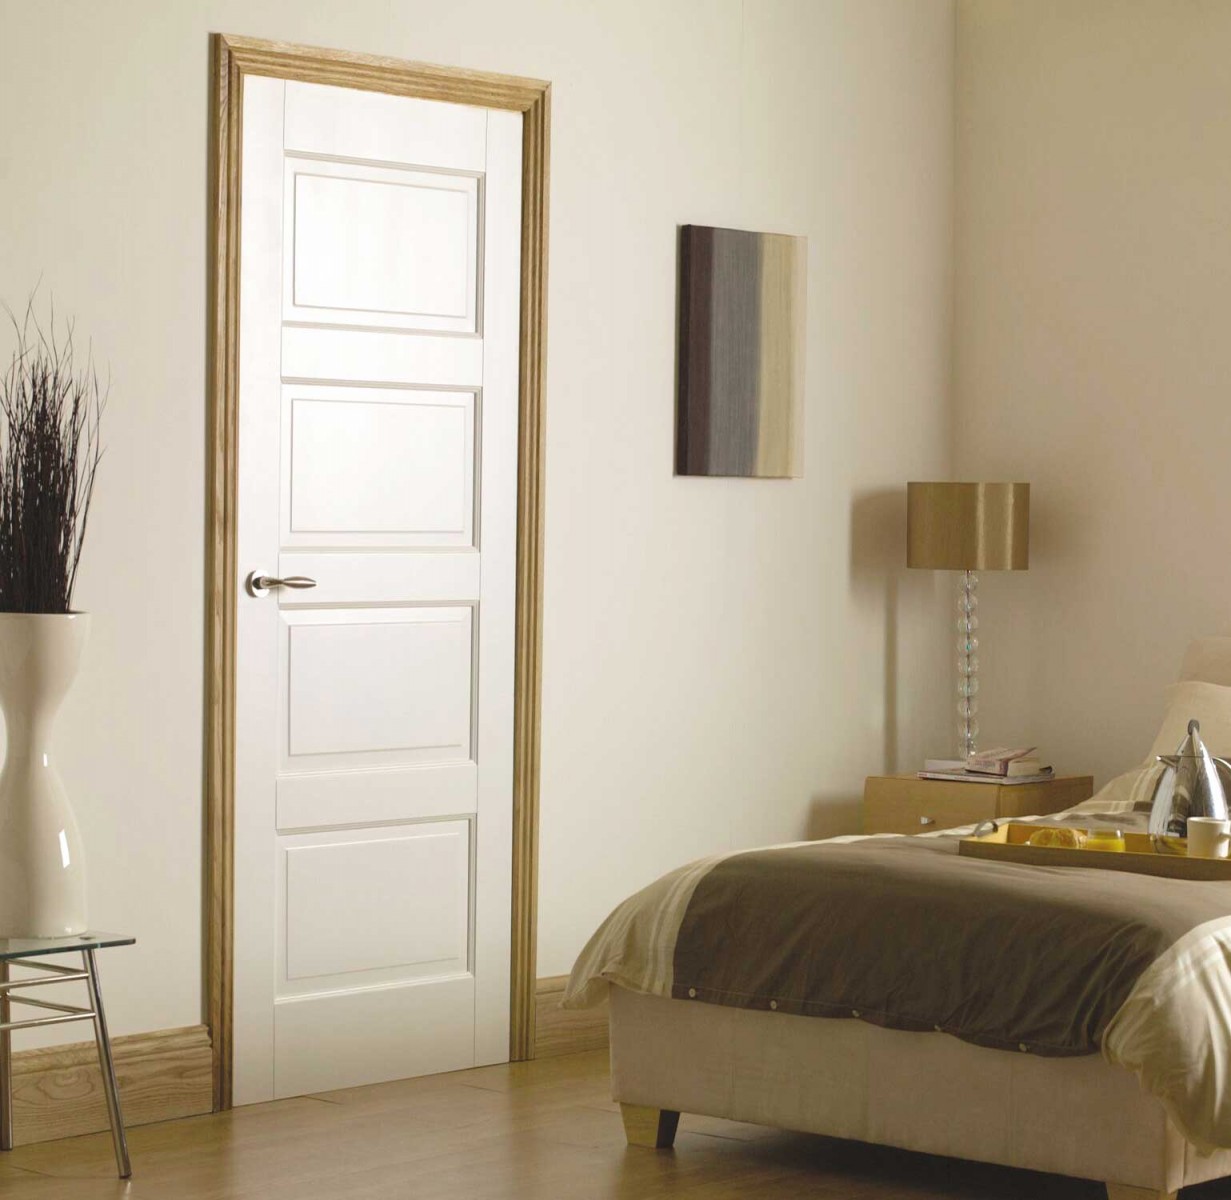 light doors in a design with a touch of dark